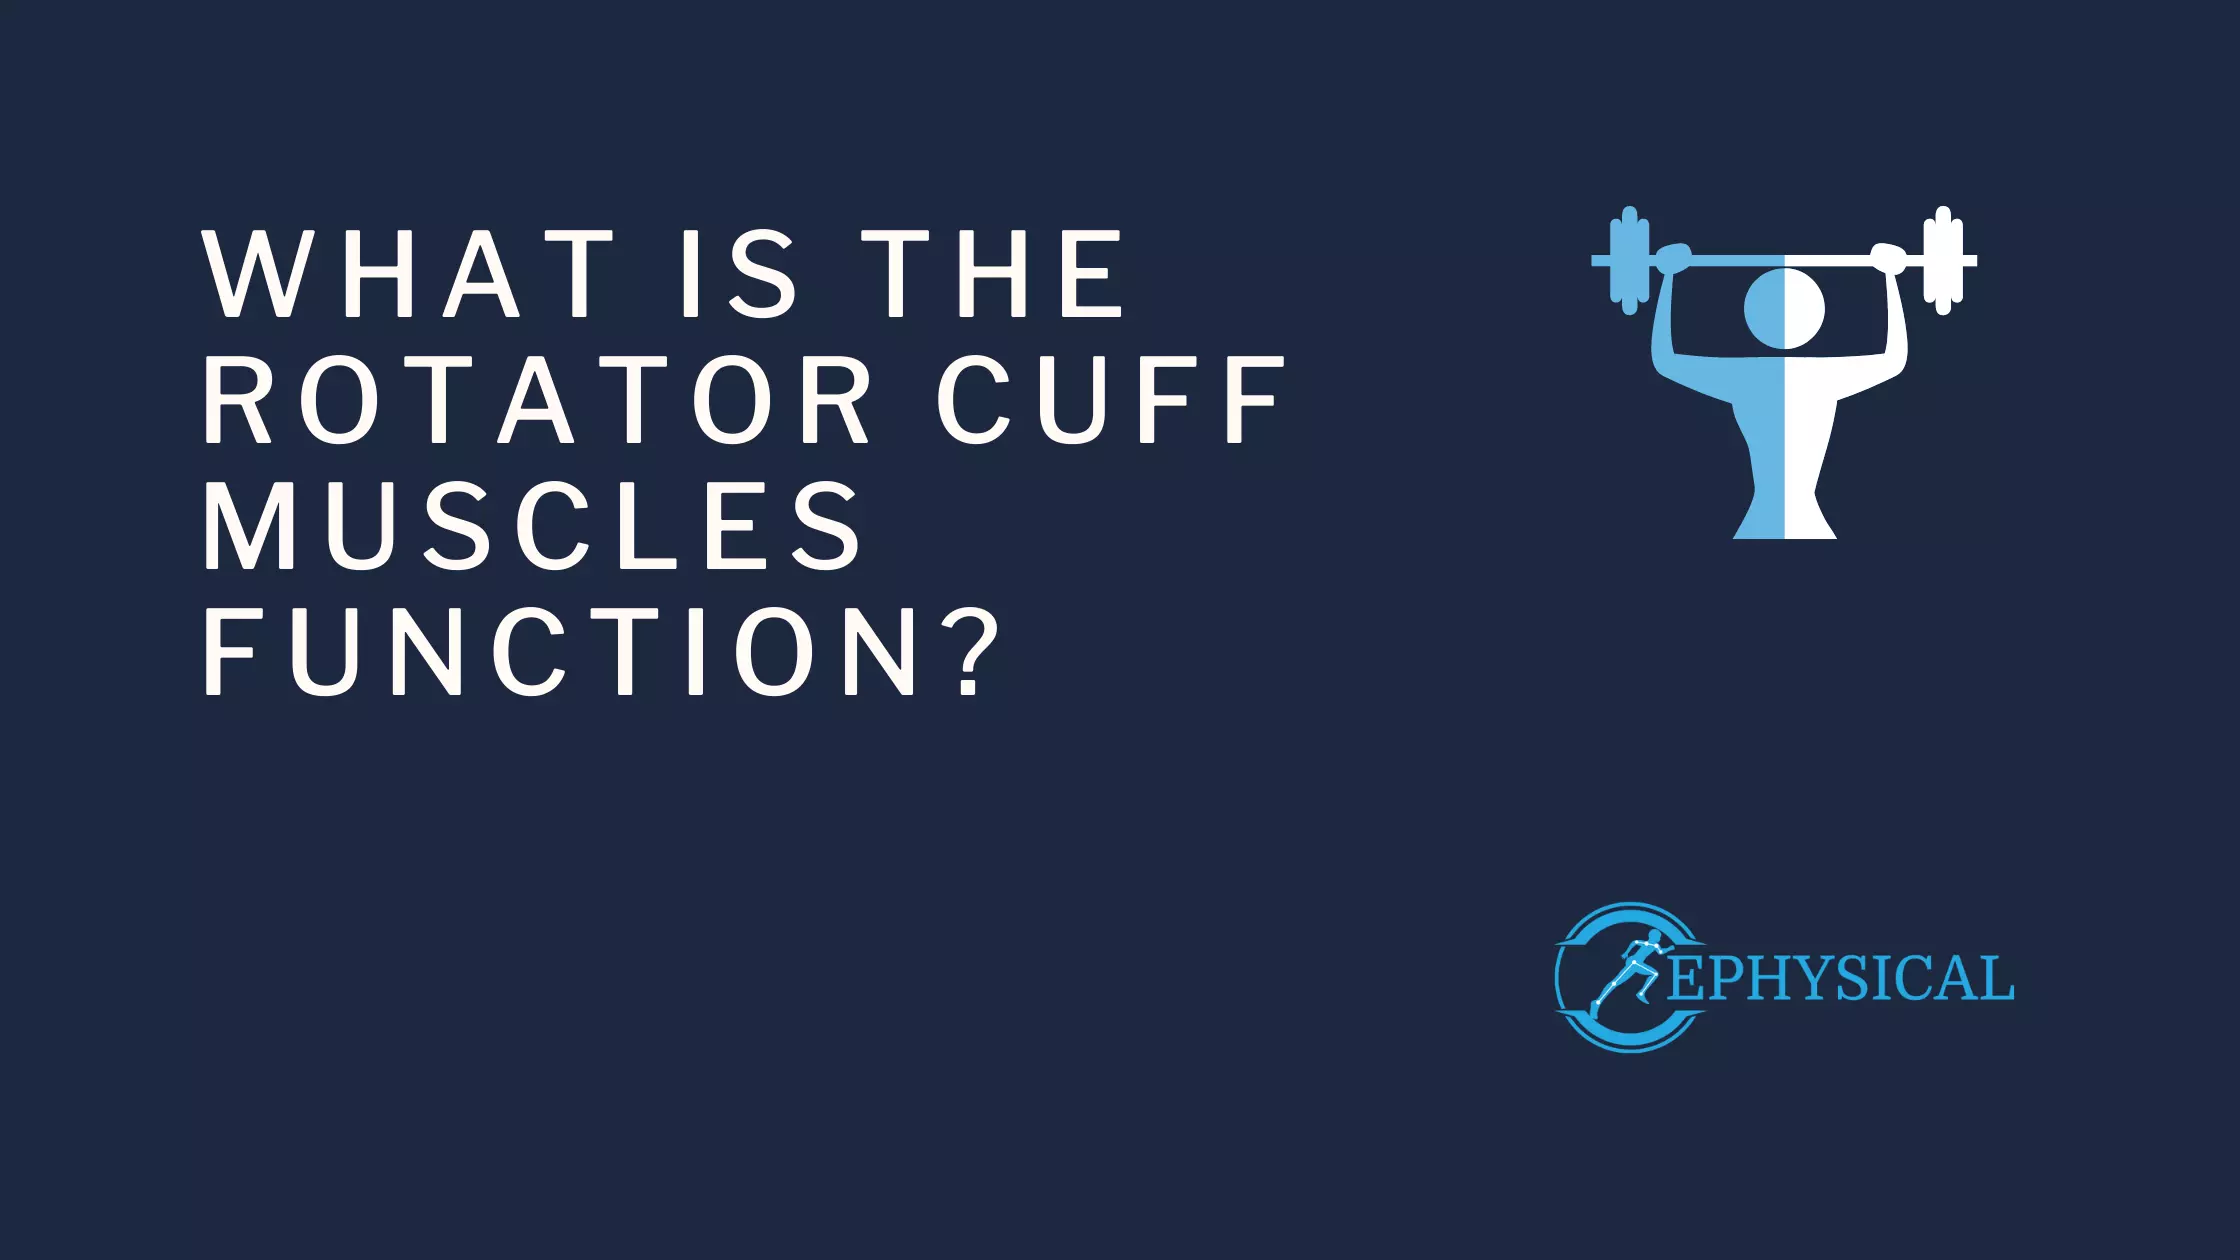 Rotator cuff muscles function blog featured image